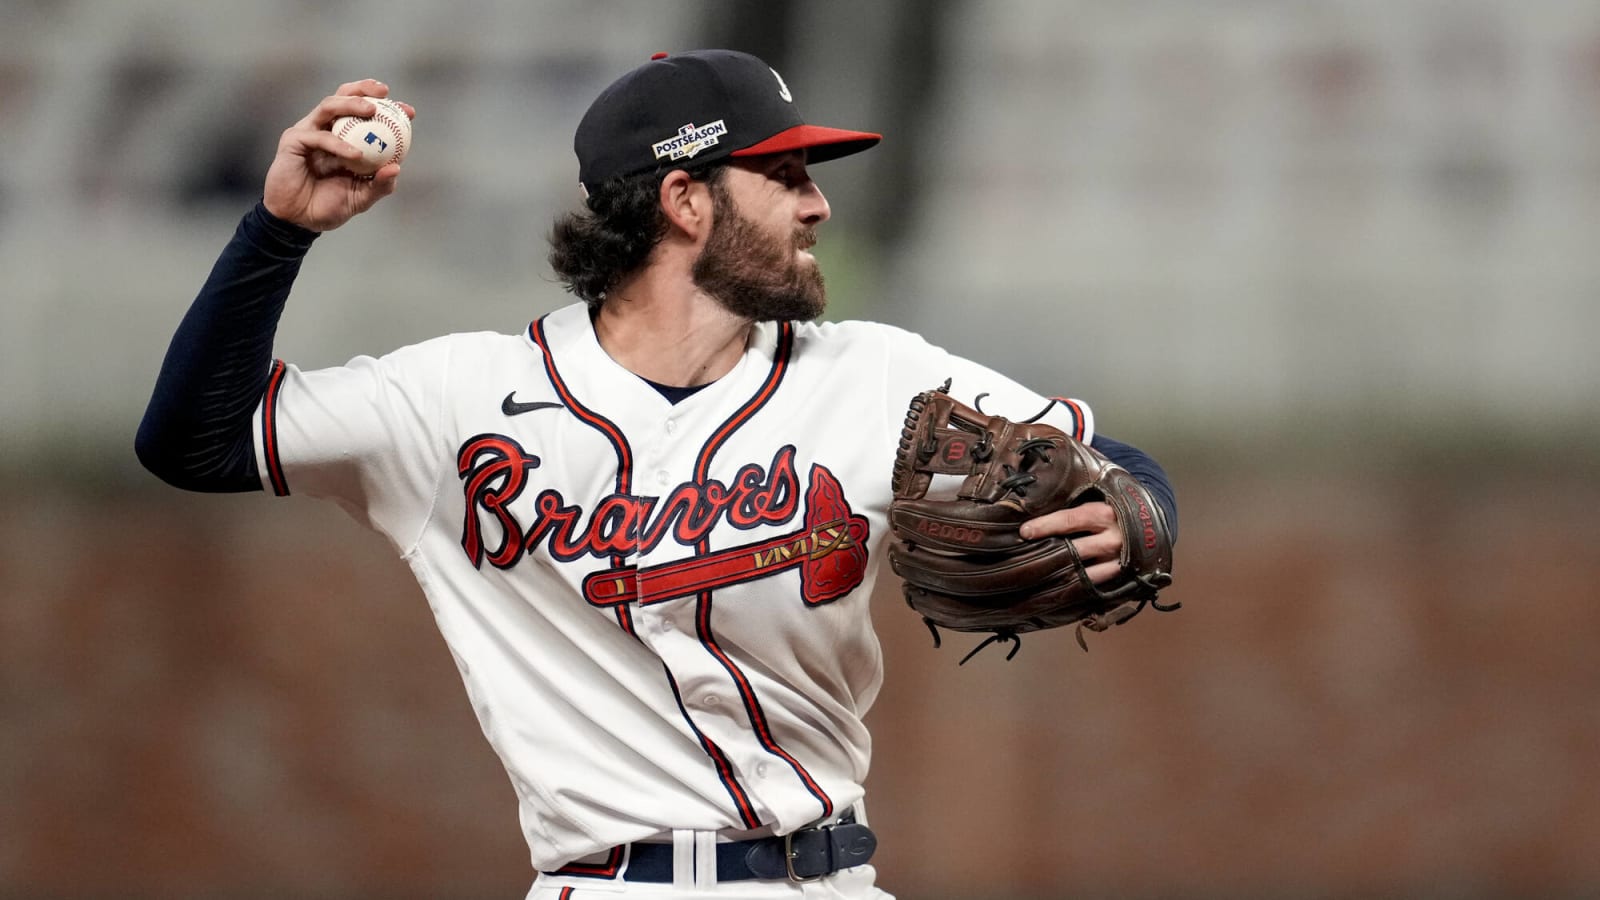 The winning stat is the most important stat': Dansby Swanson has a